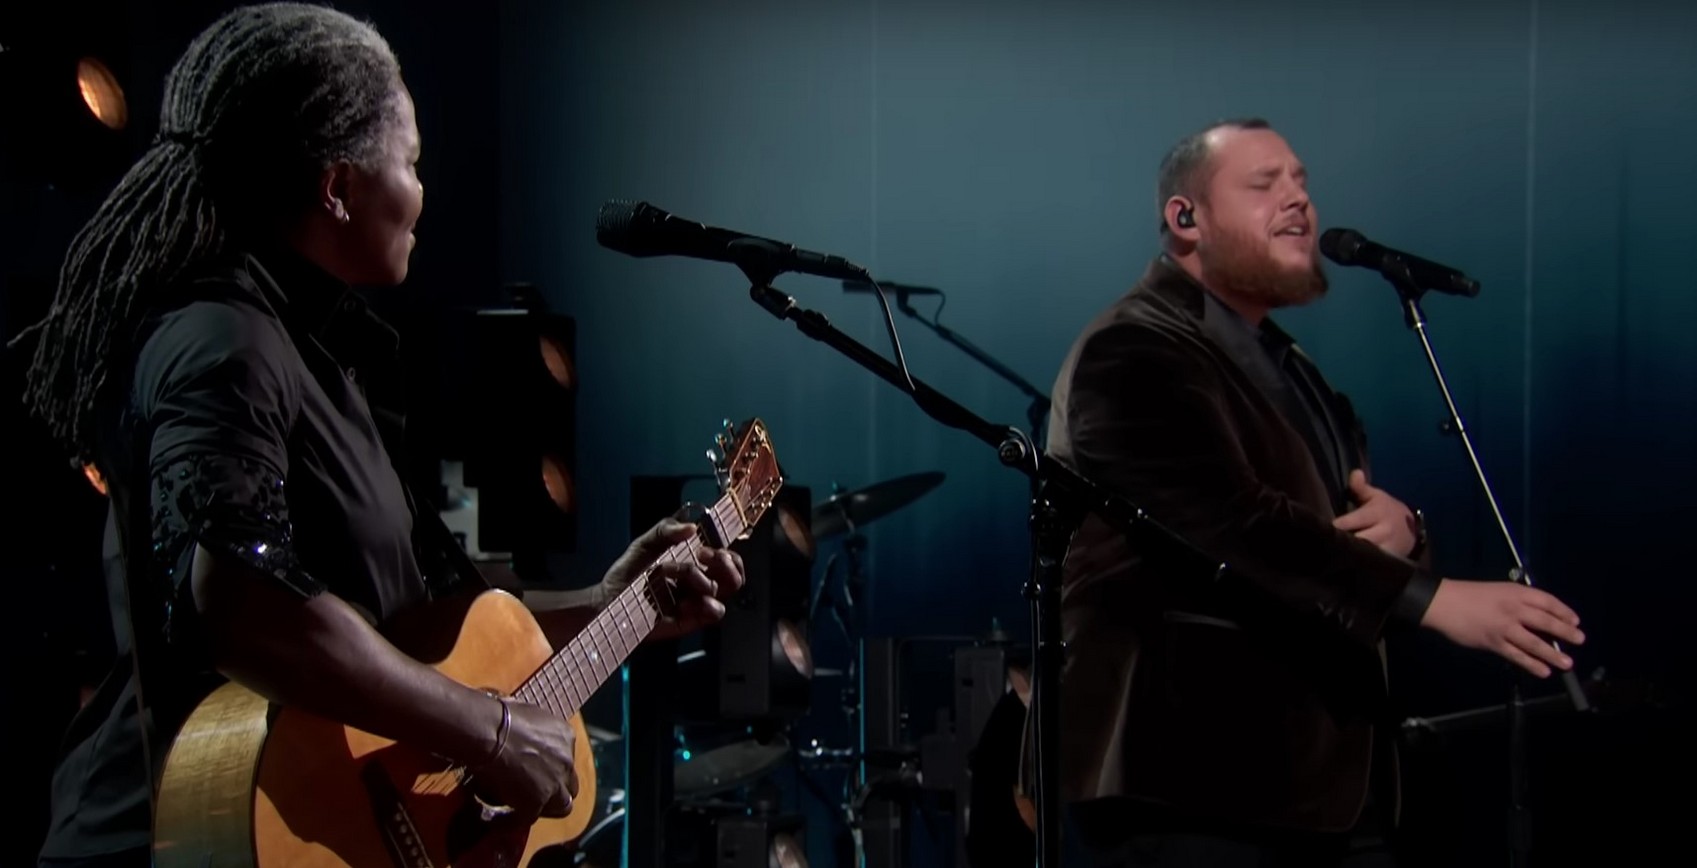 Iconic Grammy Duet Tracy Chapman and Luke Combs Perform "Fast Car"